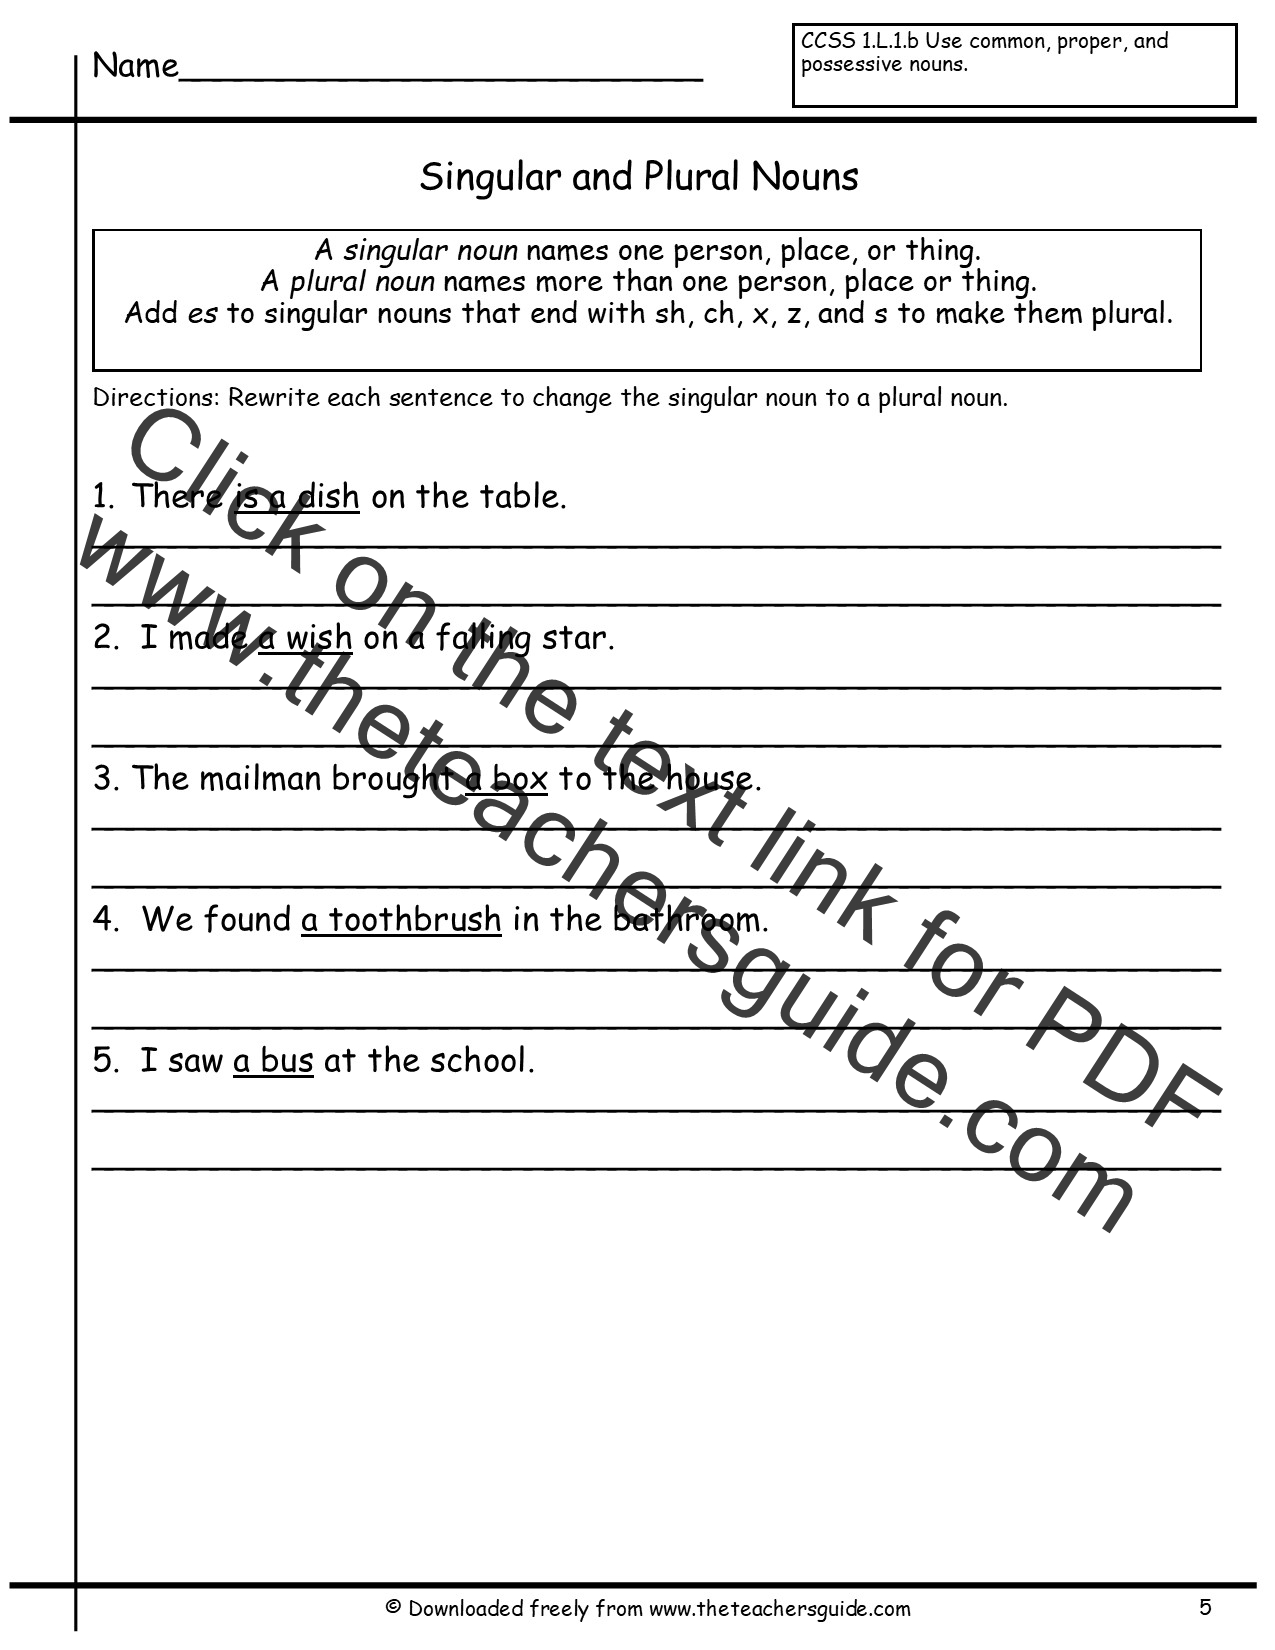 Singular and Plural Nouns Worksheets from The Teacher's Guide